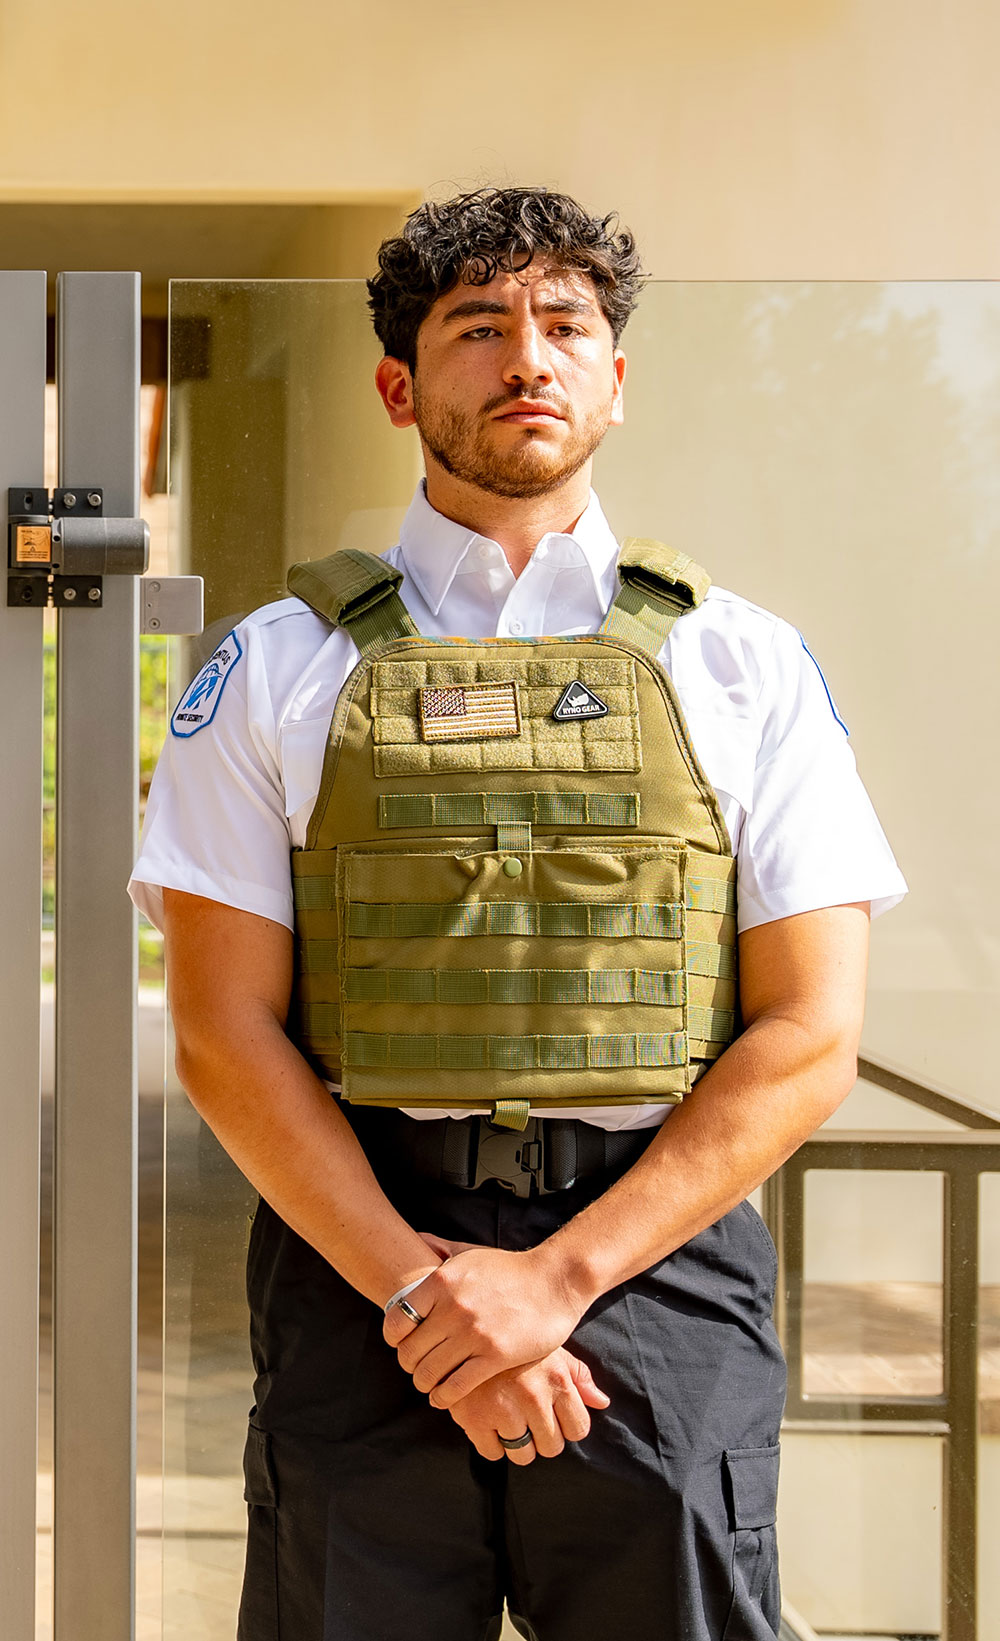 Armed guard service in San Diego